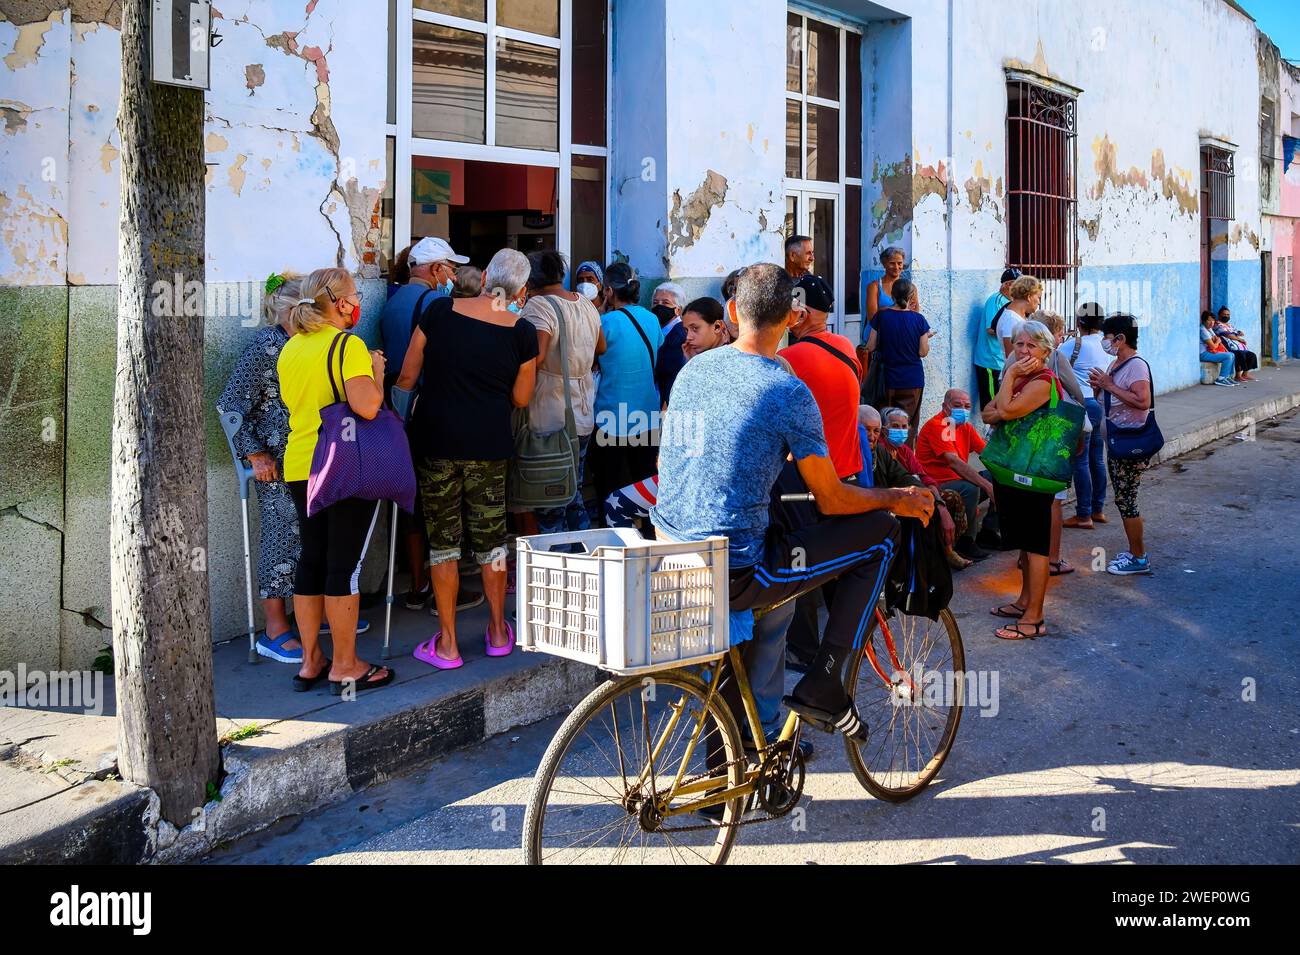 People lining-up or waiting in line to buy medications in a pharmacy in Santa Clara, Cuba Stock Photo